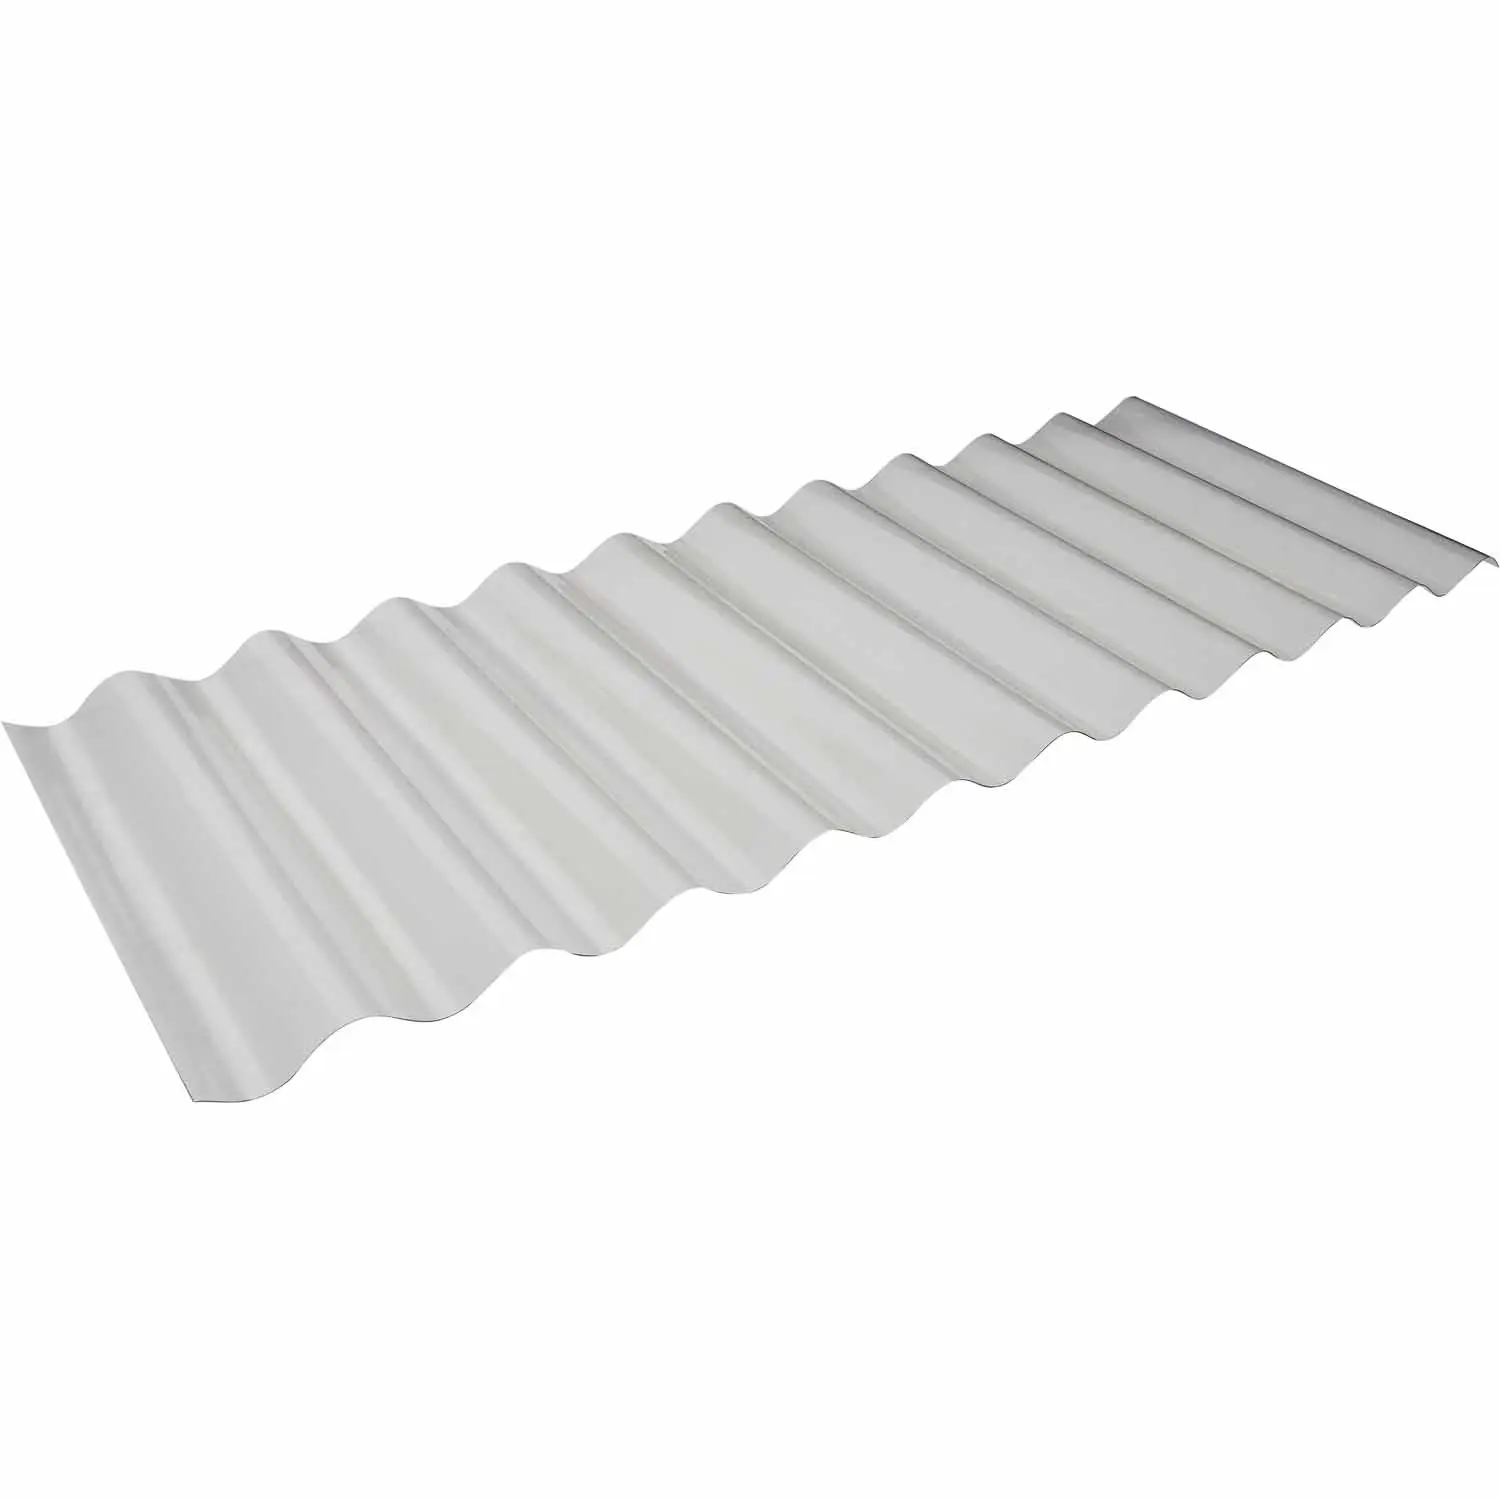 Width 2100mm greenhouse panel polycarbonate corrugated roofing sheet panels in clear